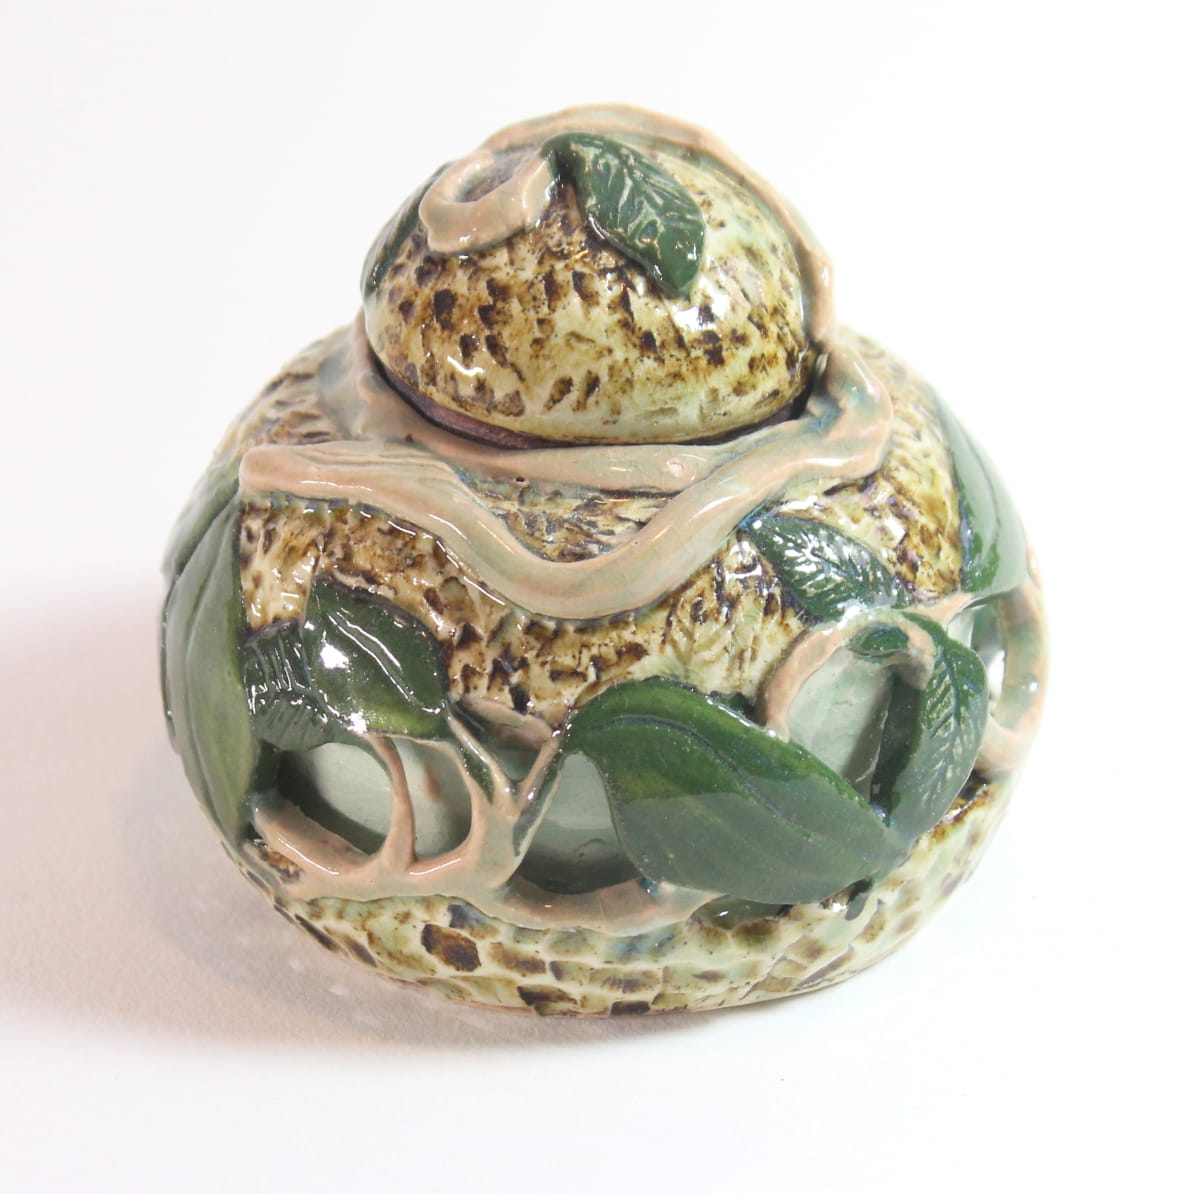 Sculpted Double-Walled Jar - Vines and Leaves - Lidded 